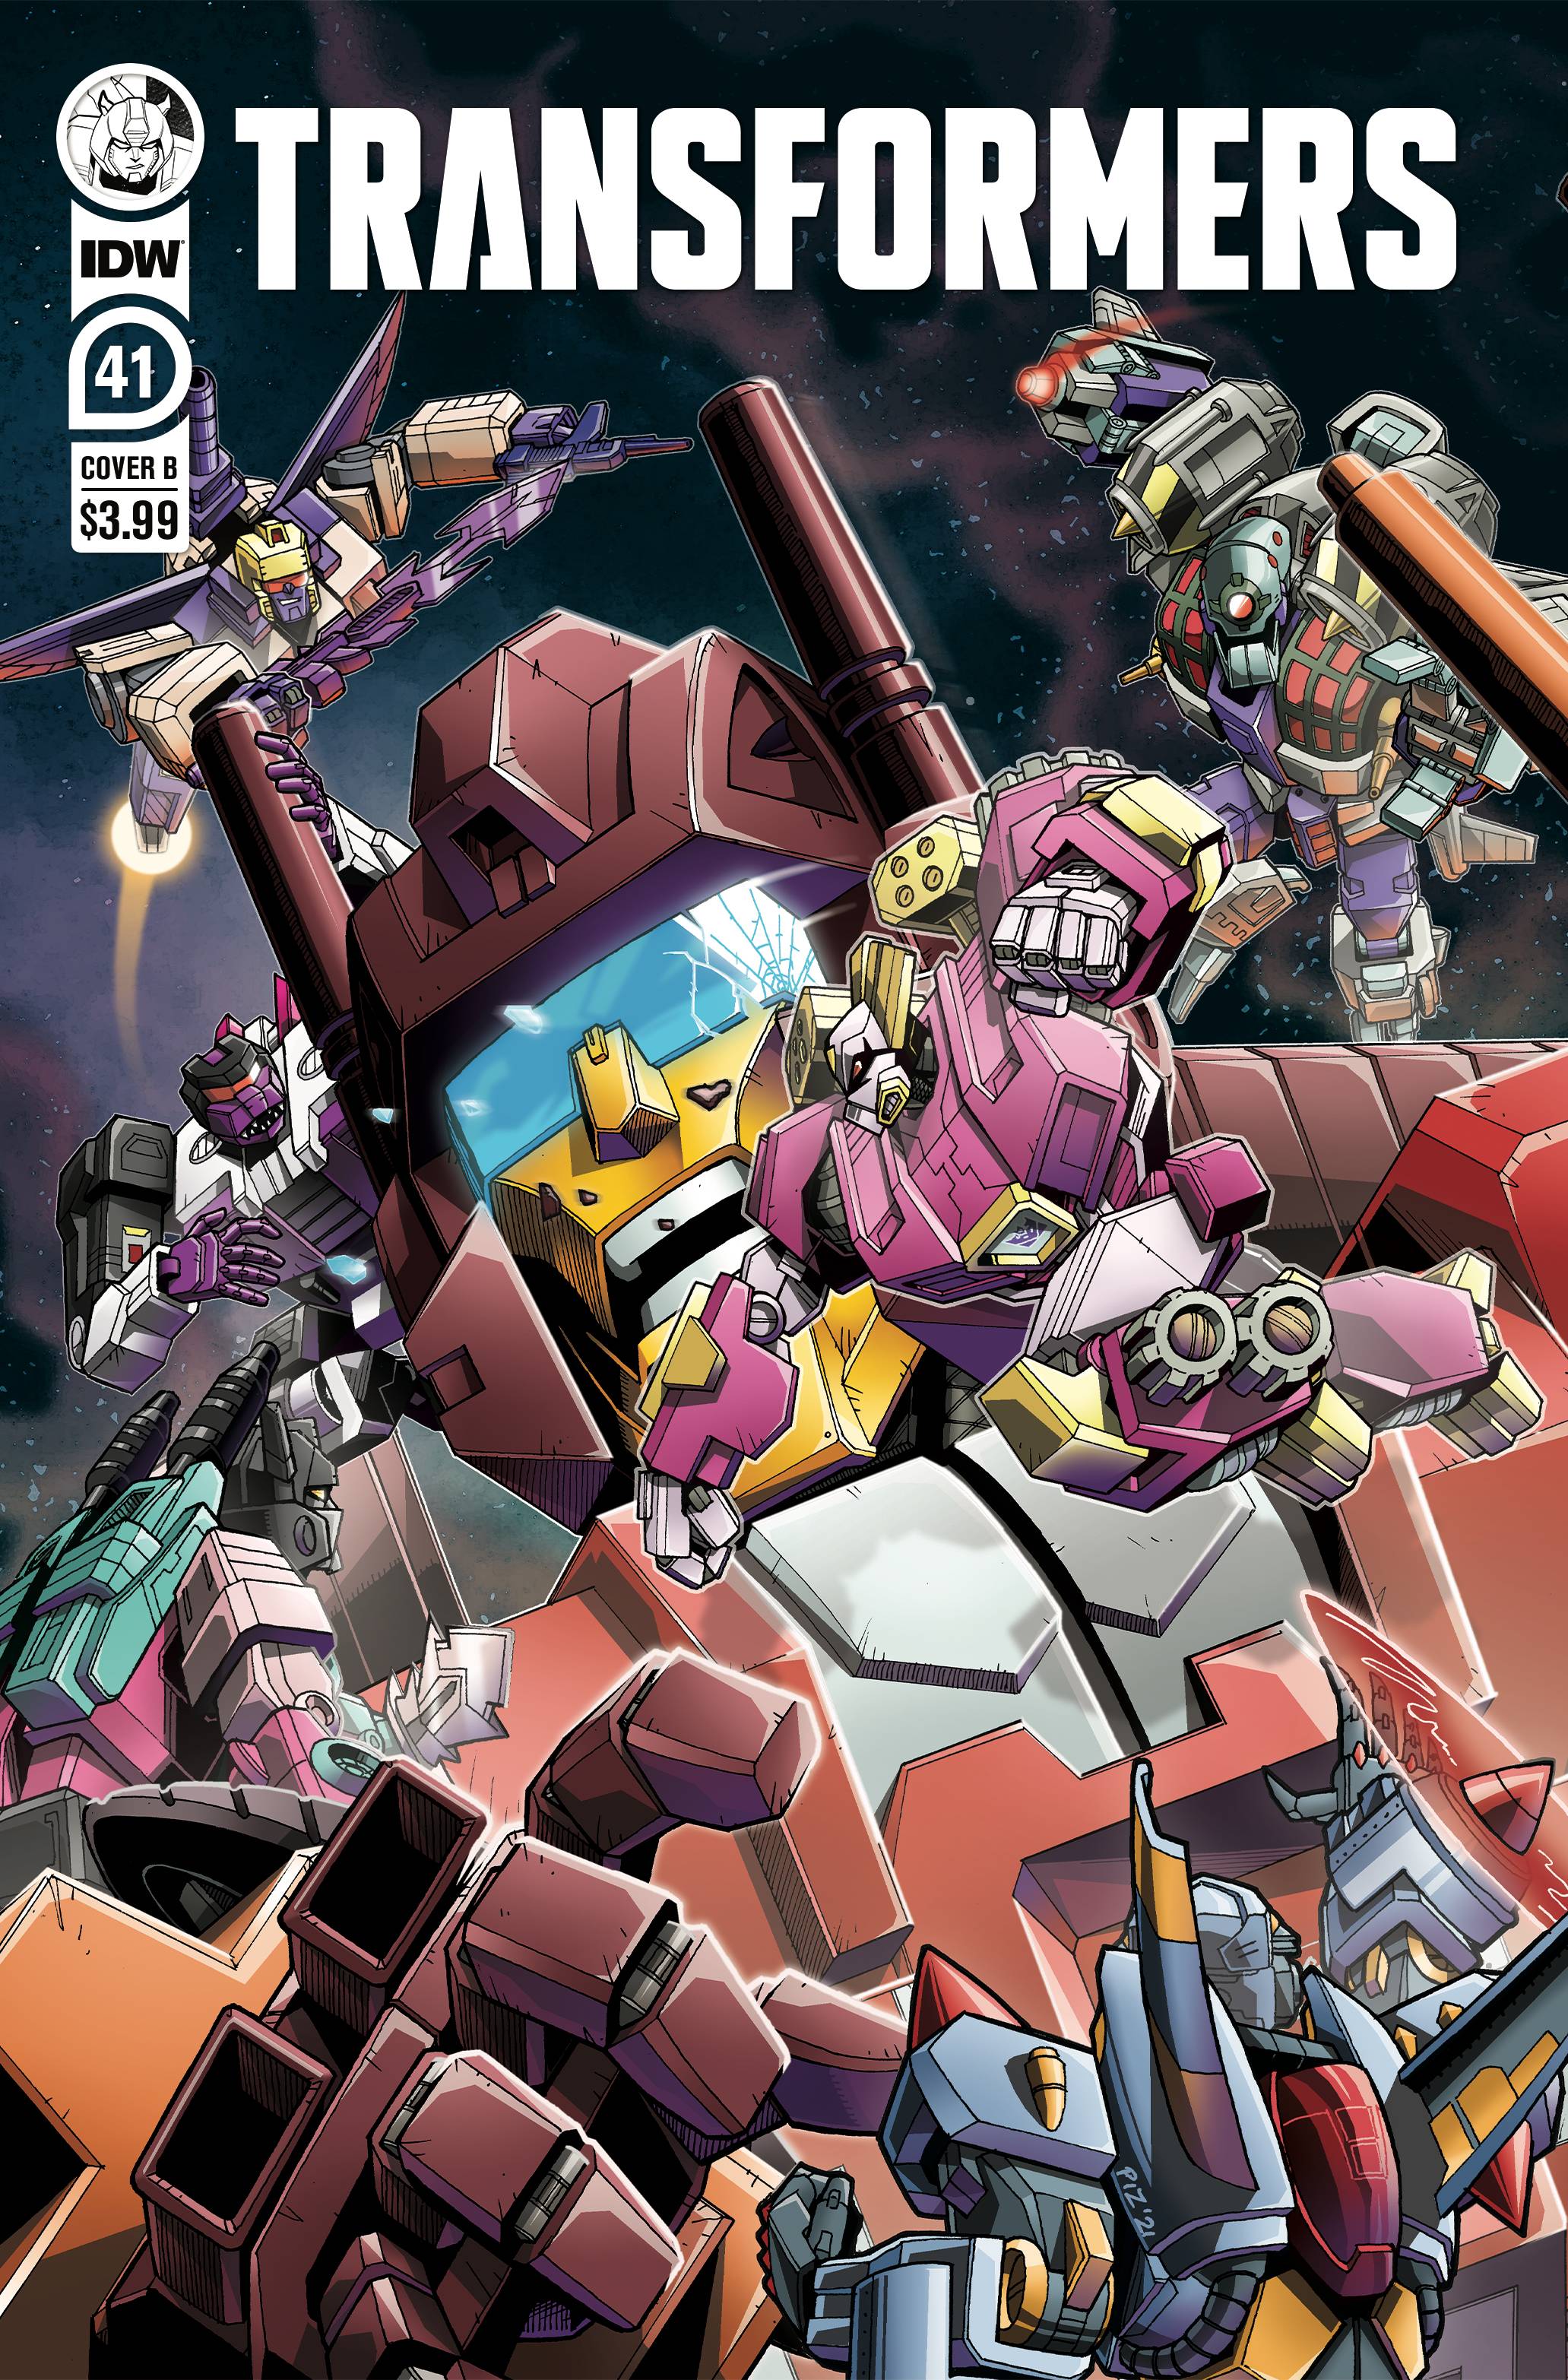 Transformers Volume 41 Cover B Pirrie